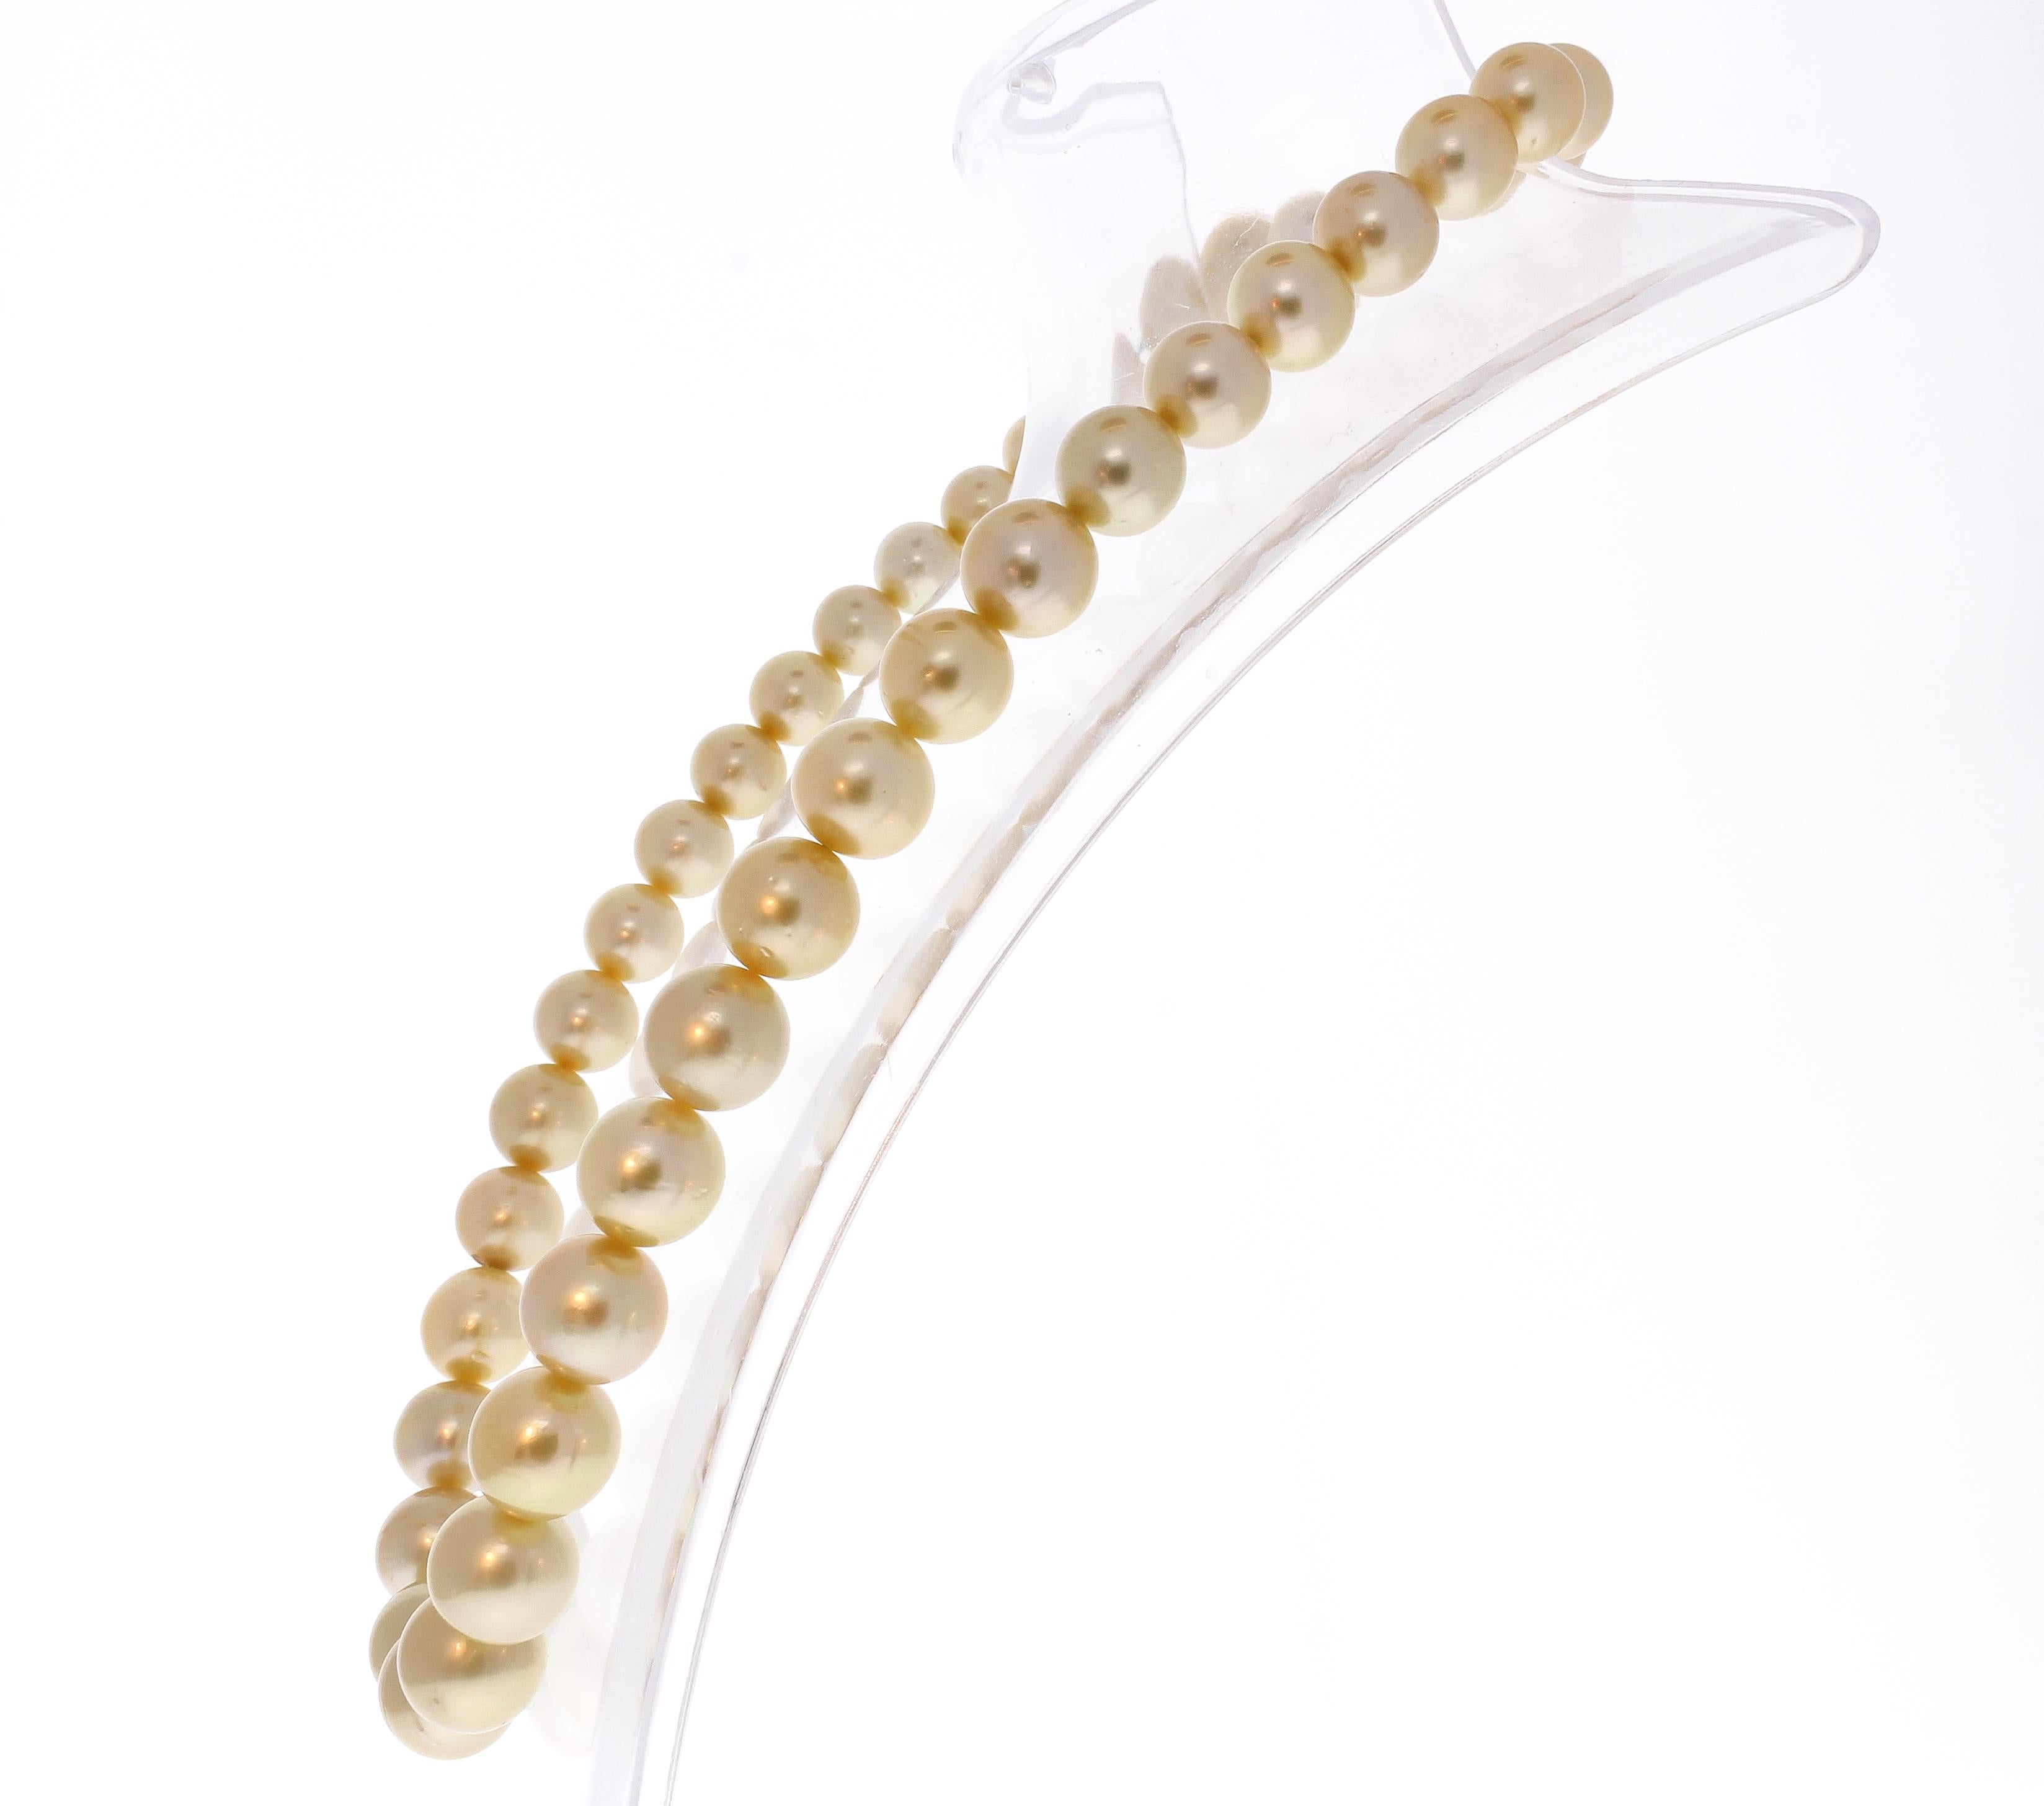 Cream colored pearls are a versatile and bold choice when selecting the best strand to pair with your favorite ensembles. This strand is versatile because the warm cream color pairs beautifully with anything, and they are a bold choice because they